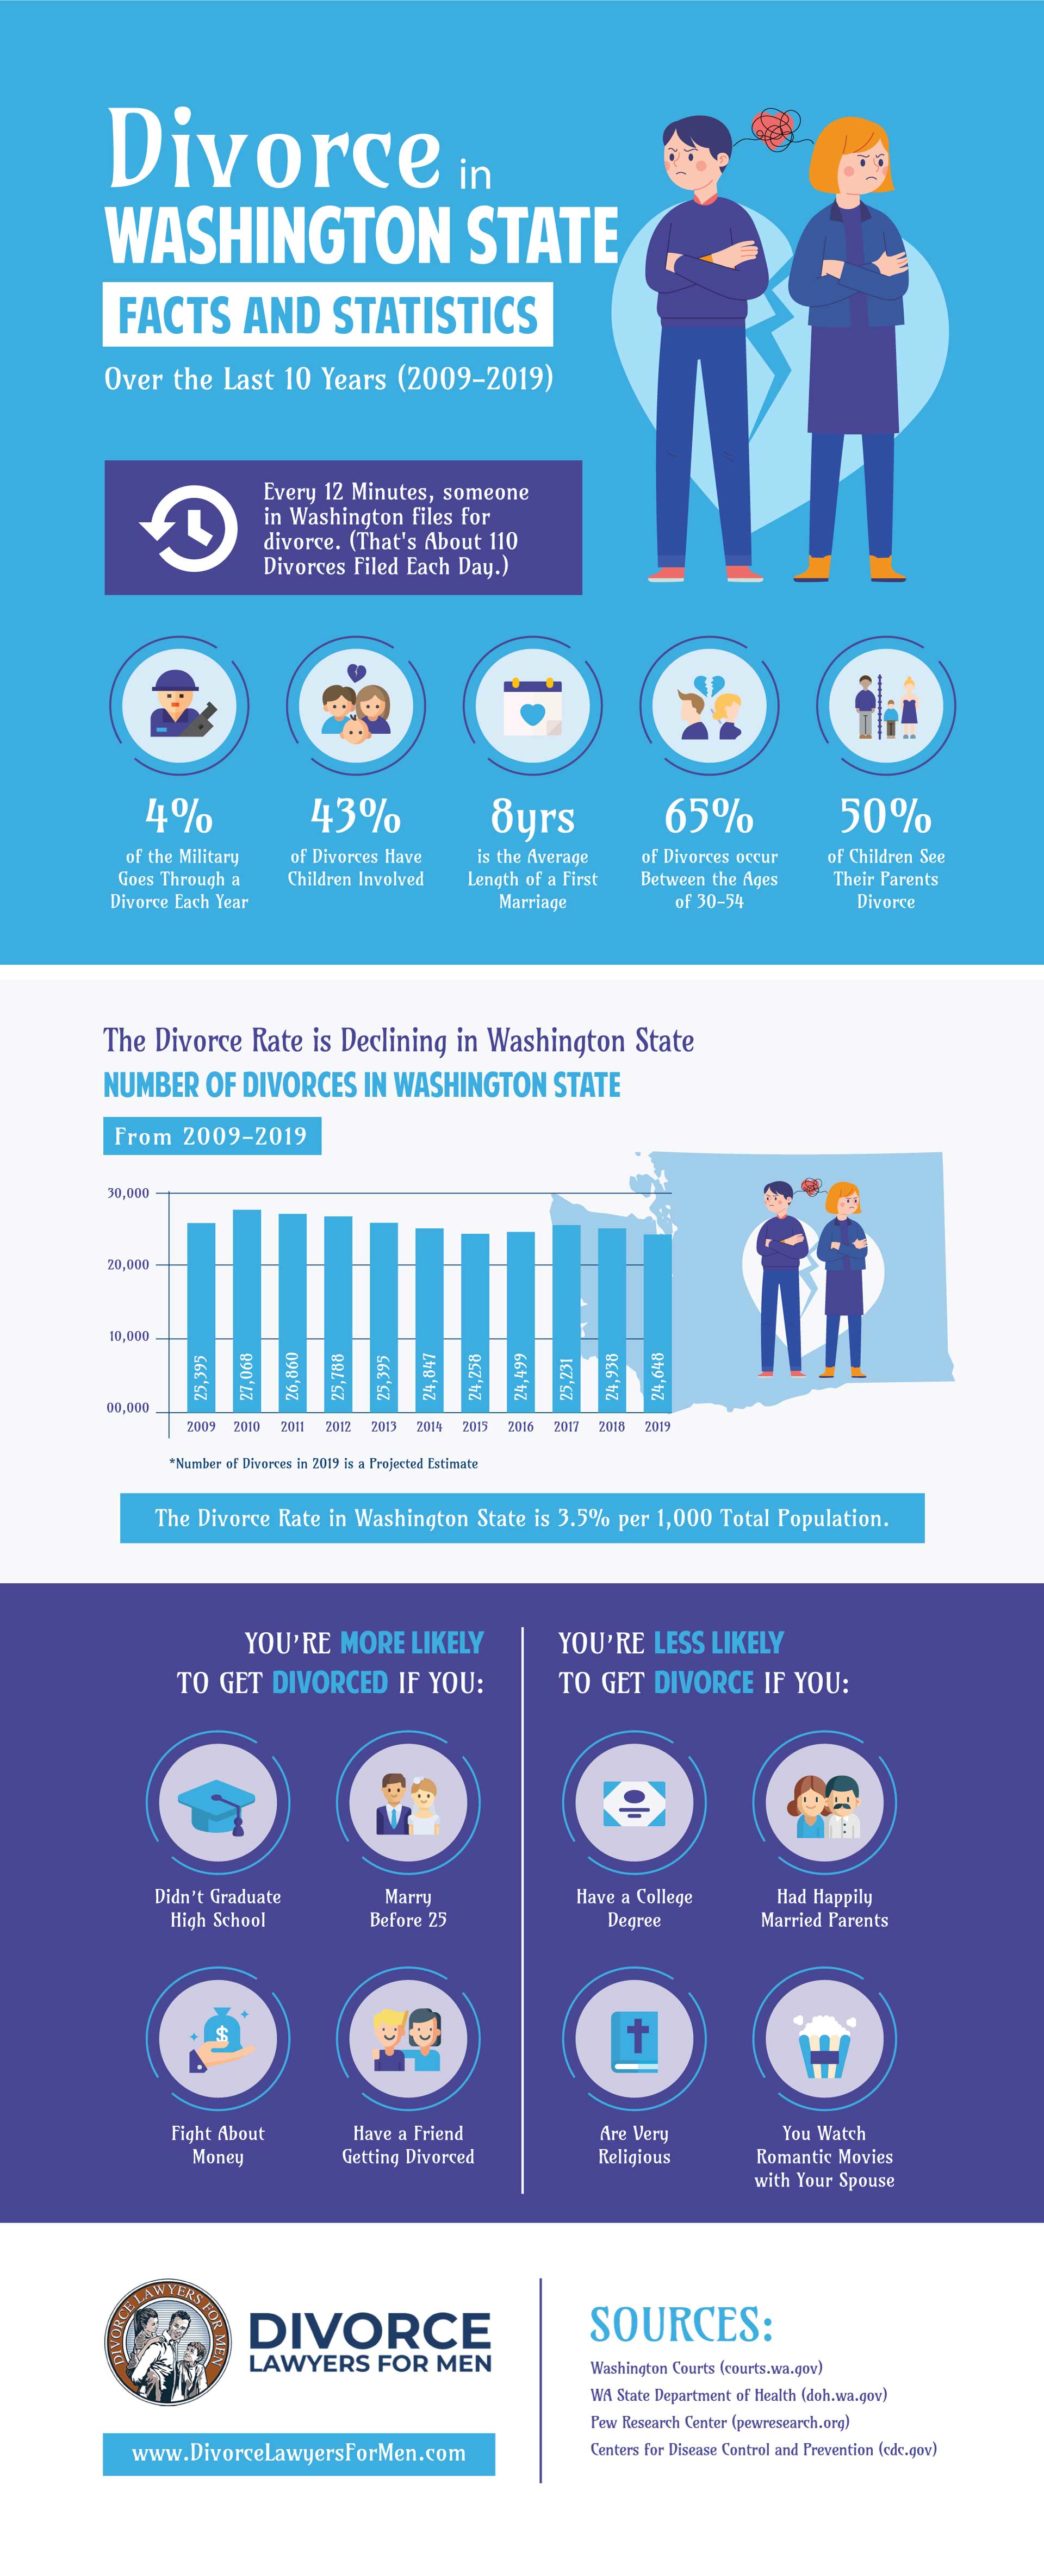 Divorce Statistics and Facts in Washington State